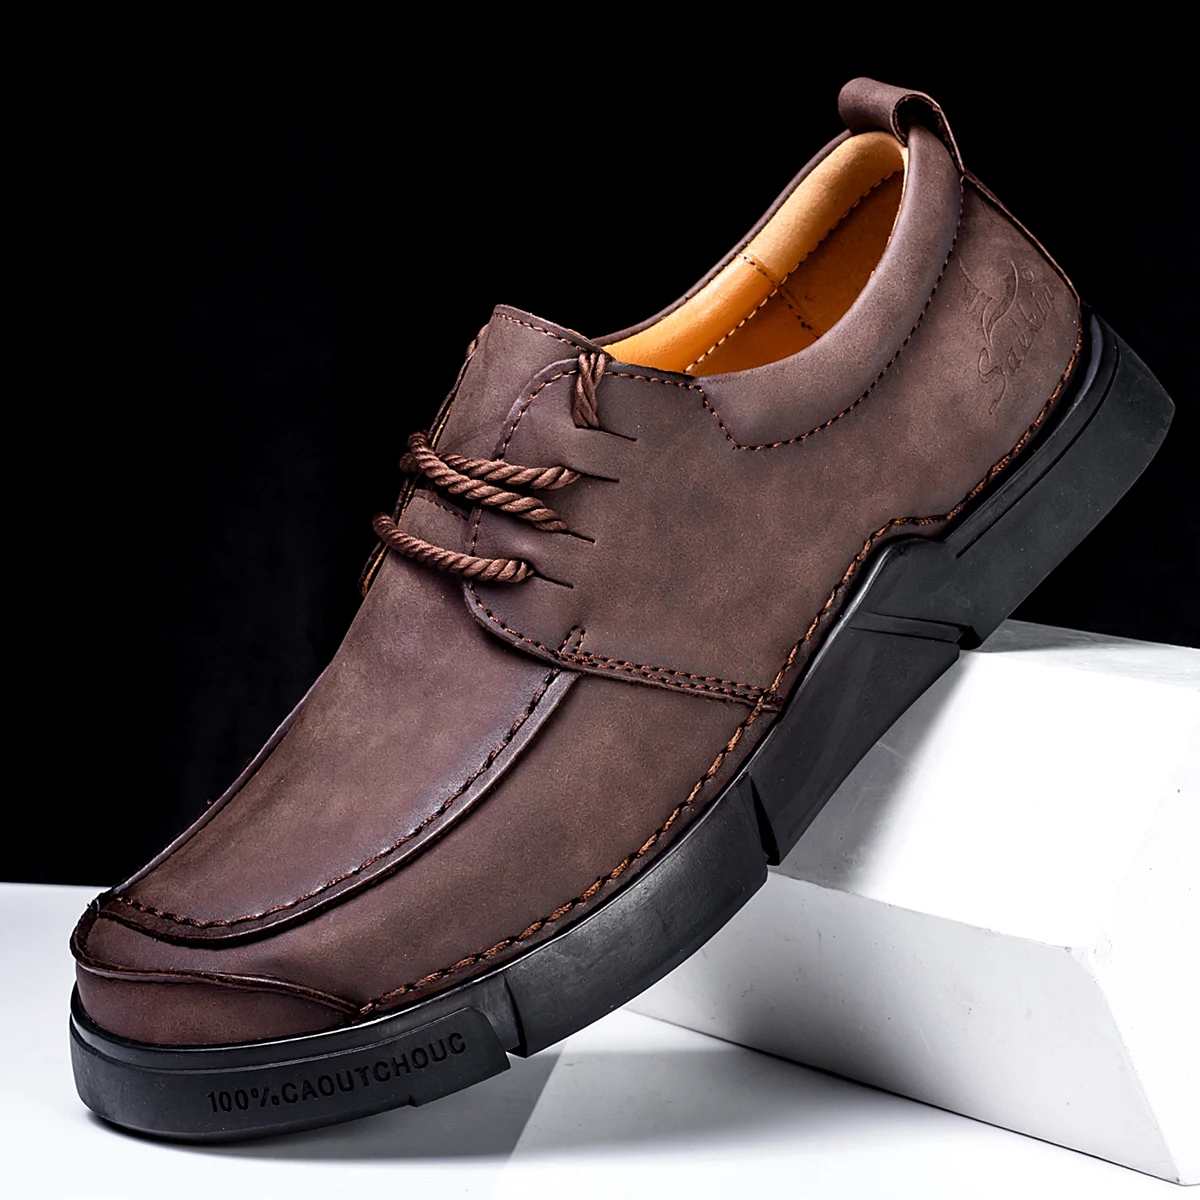 Intage hand stitching soft business casual genuine leather loafers boots handmade shoes thumb200